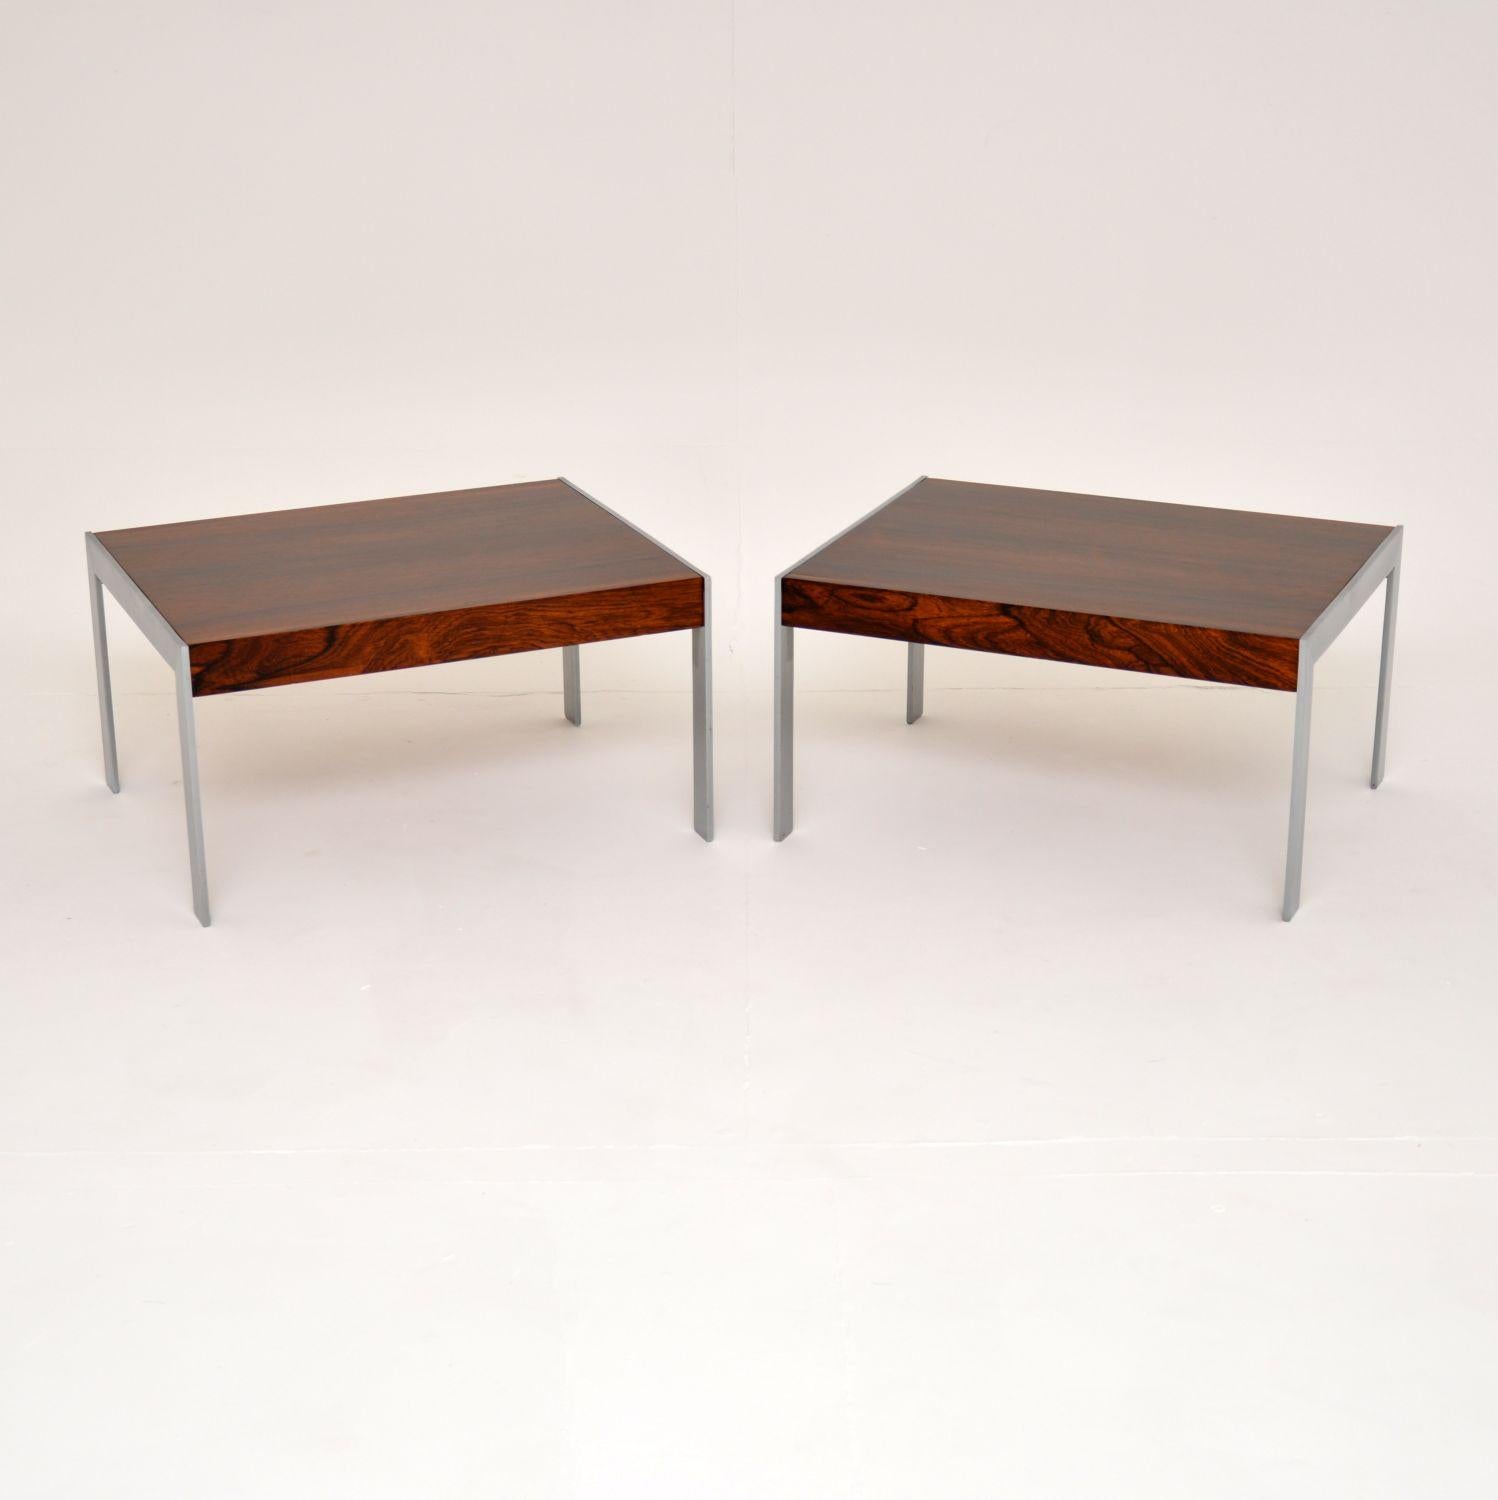 A superb pair of wood and chrome side tables by Merrow Associates. These were designed by Richard Young, they were made in England in the early 1970’s. The quality is absolutely outstanding, these are extremely well made and are a useful size. The